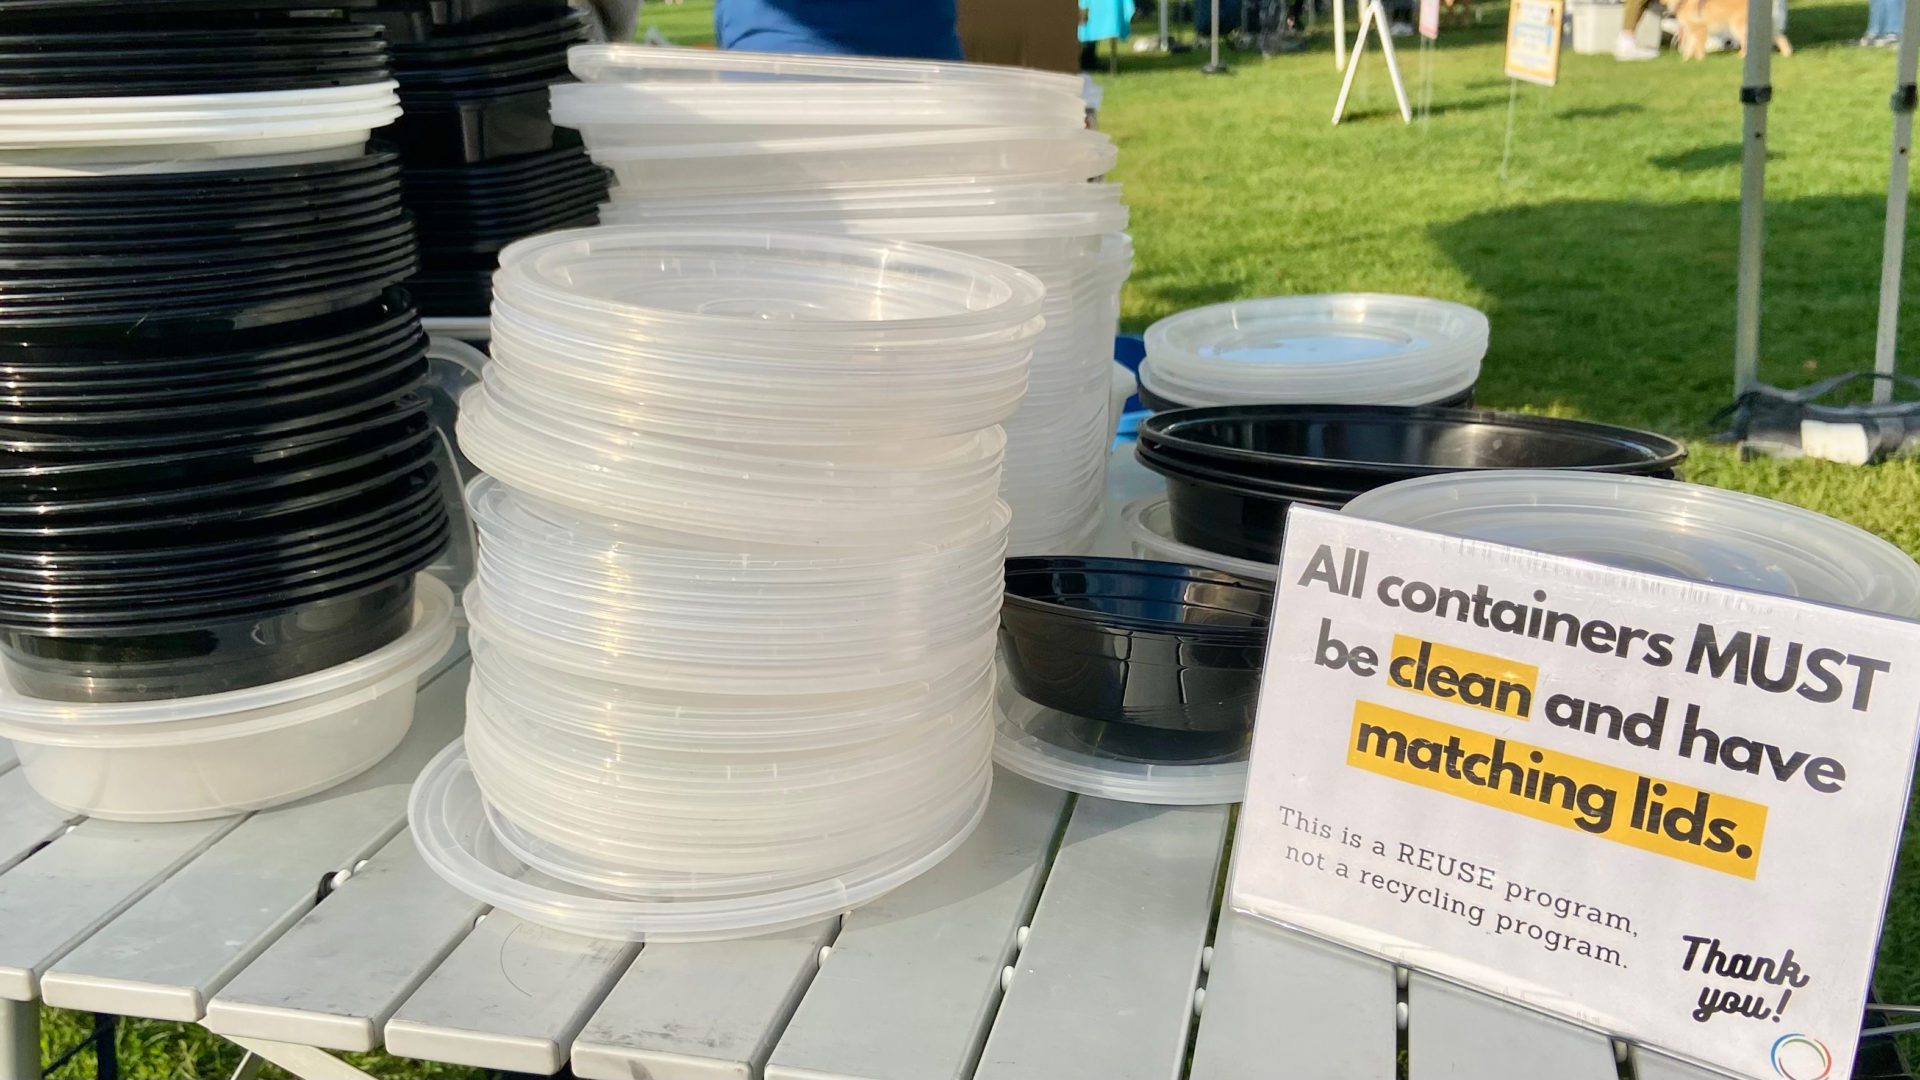 Here's the latest way to recycle your black food containers in Toronto